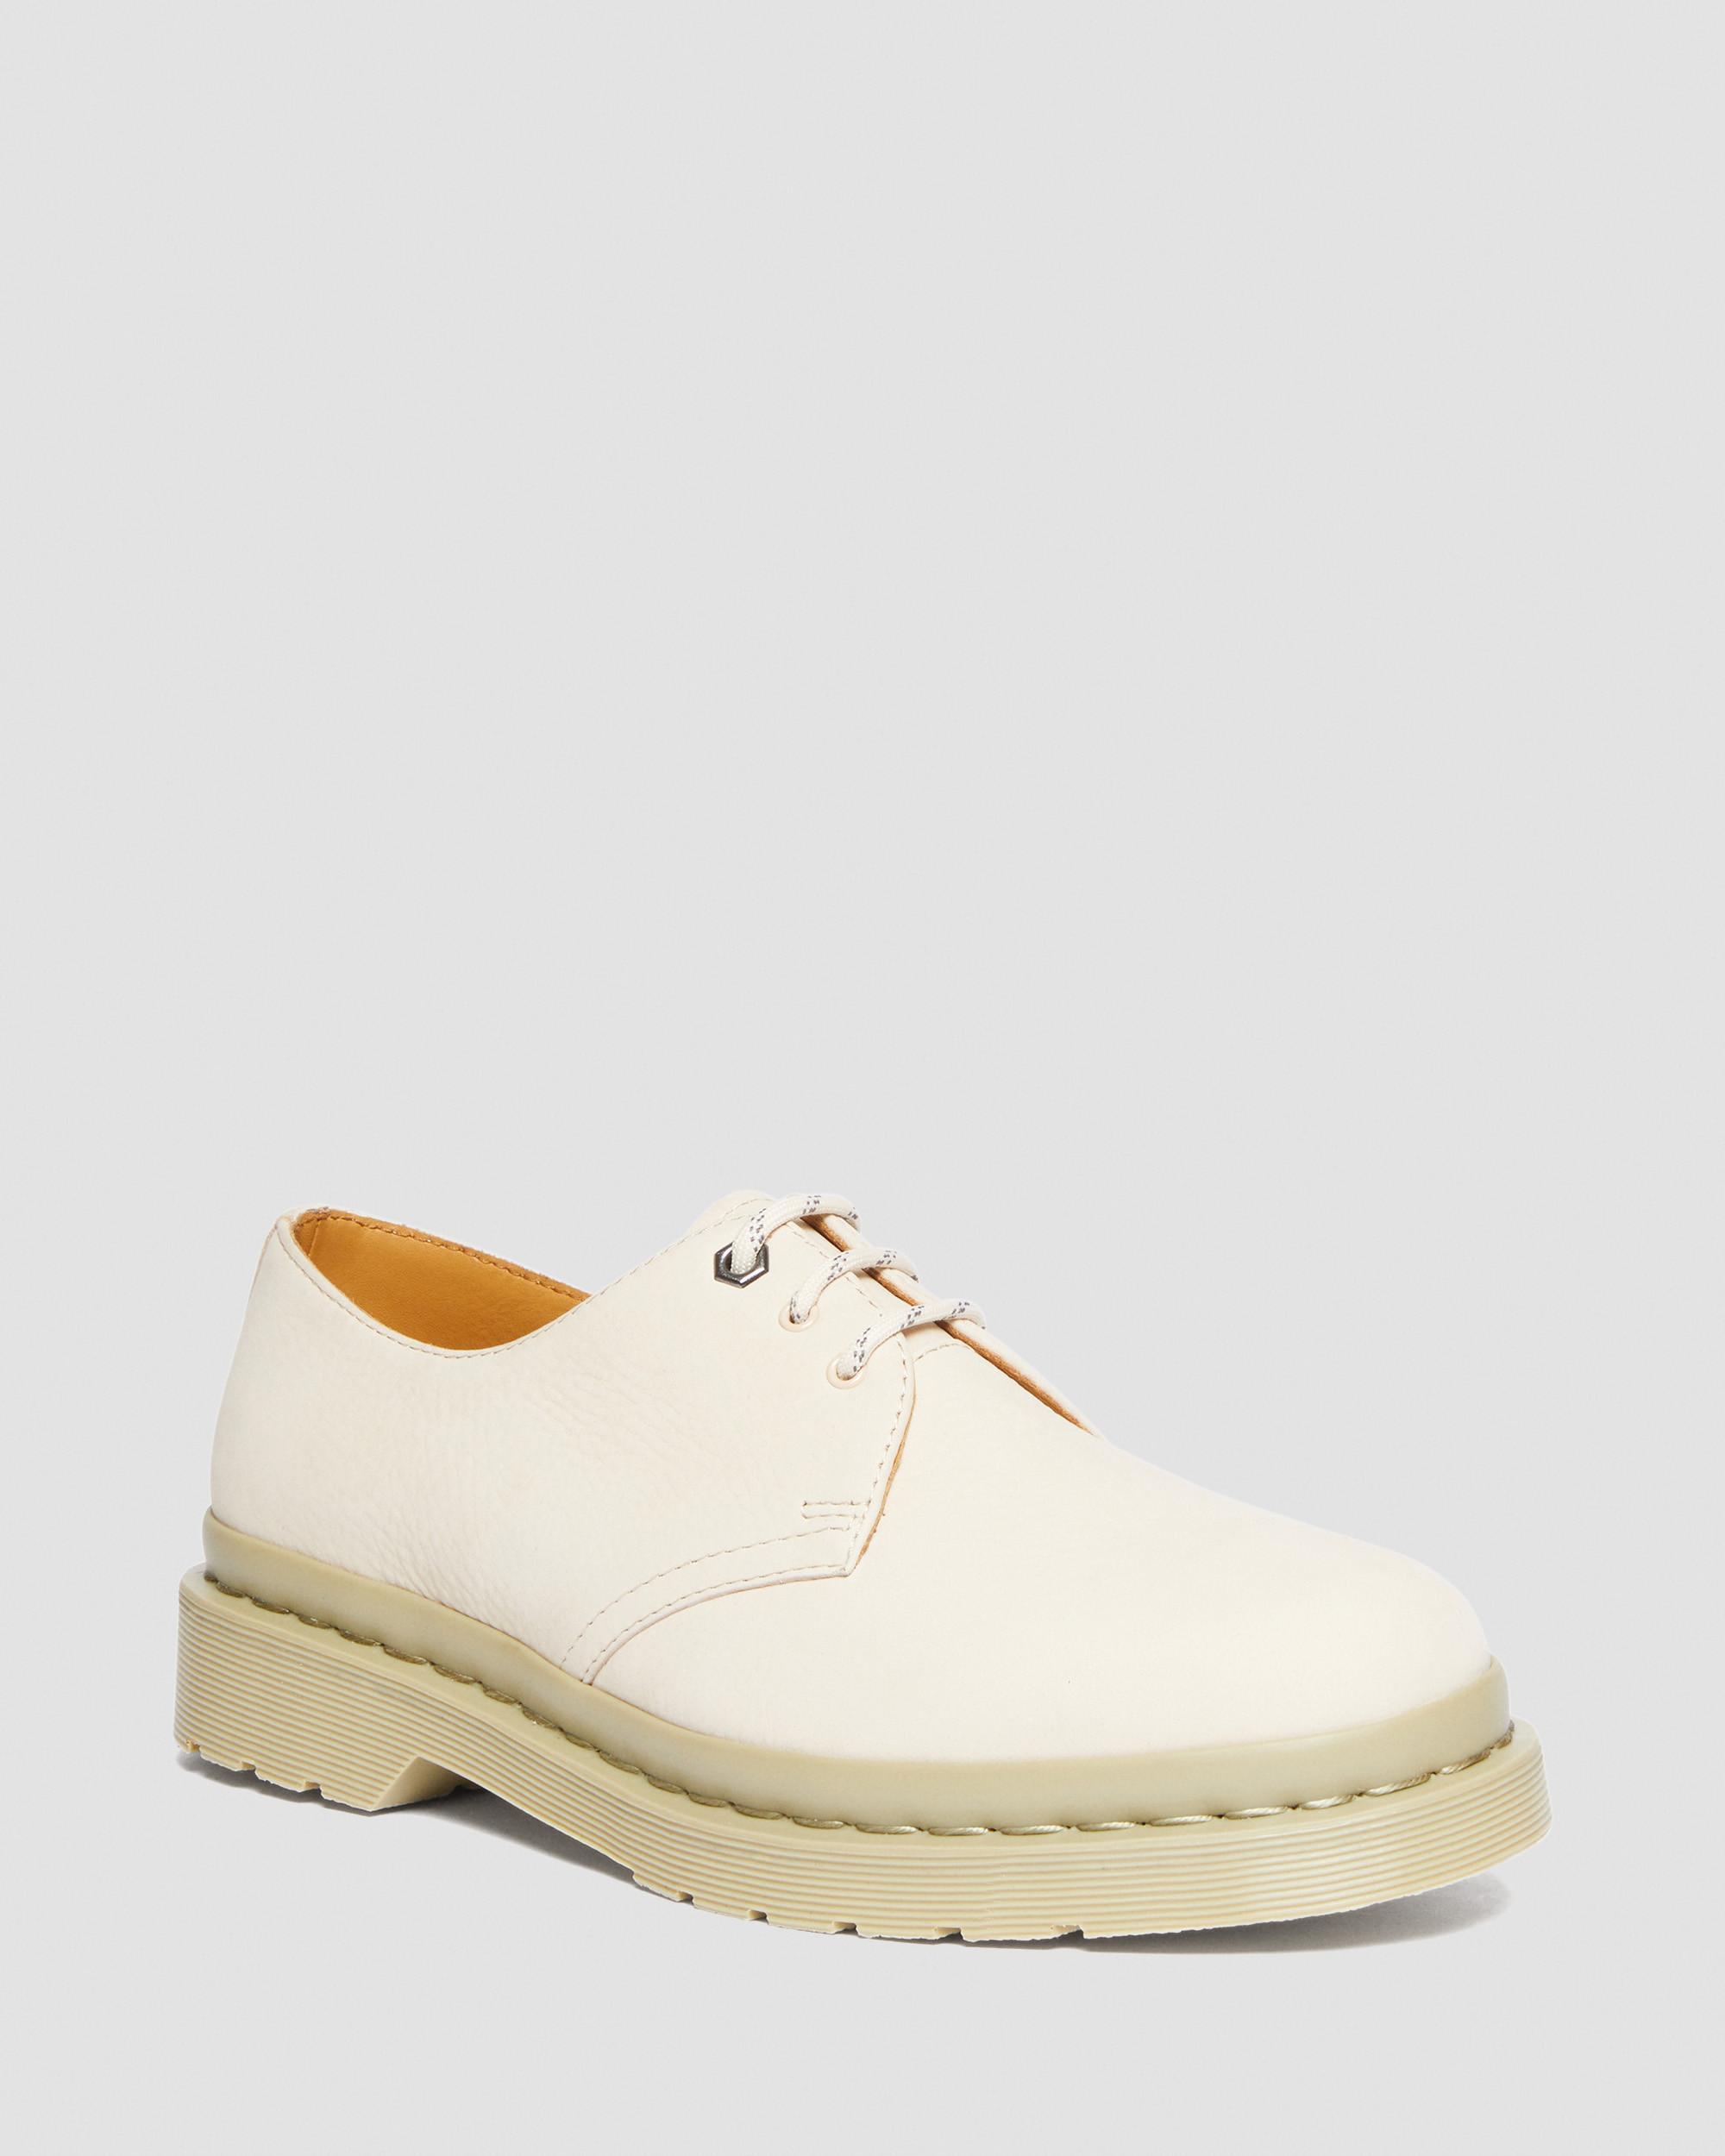 Dr. Martens 1461 Mono Milled Nubuck Leather Oxford Shoes in Natural for Men  | Lyst